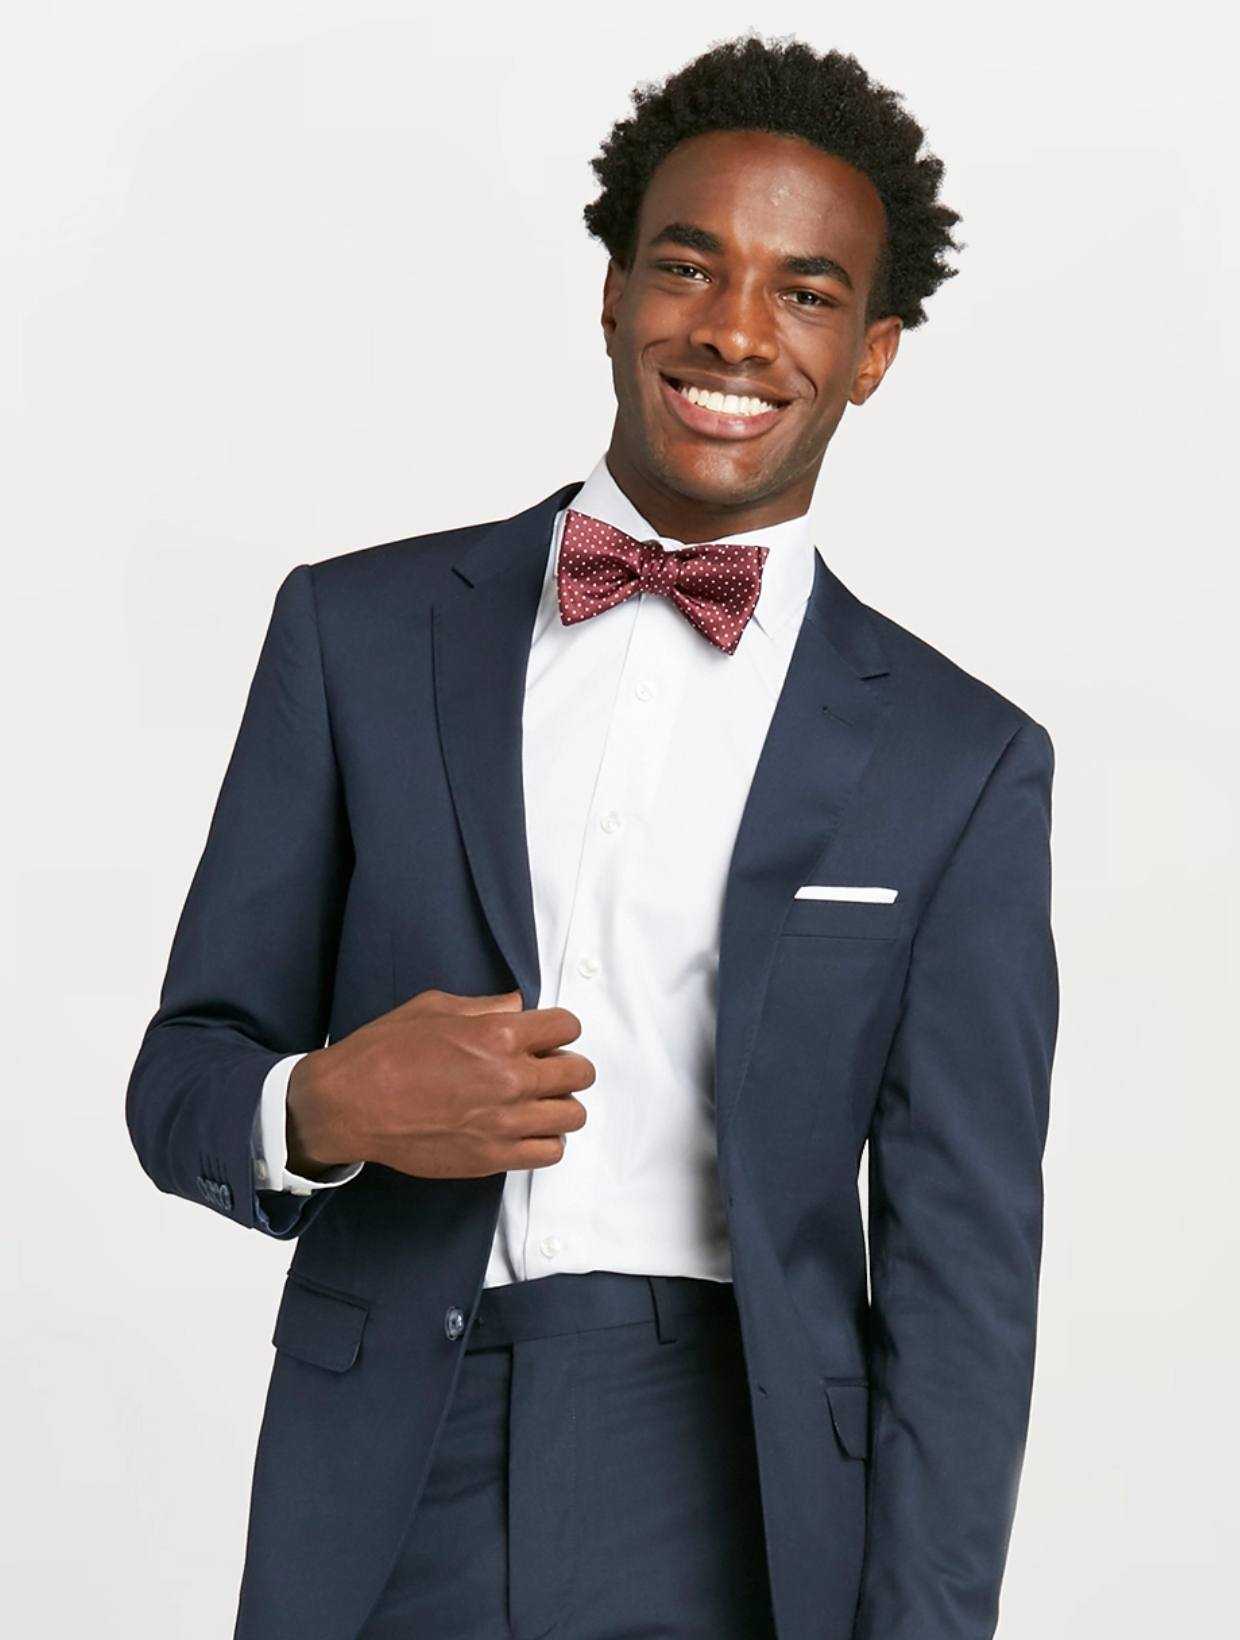 Guy at prom smiling in navy blue prom suit, maroon polka dot bow tie & pocket square.